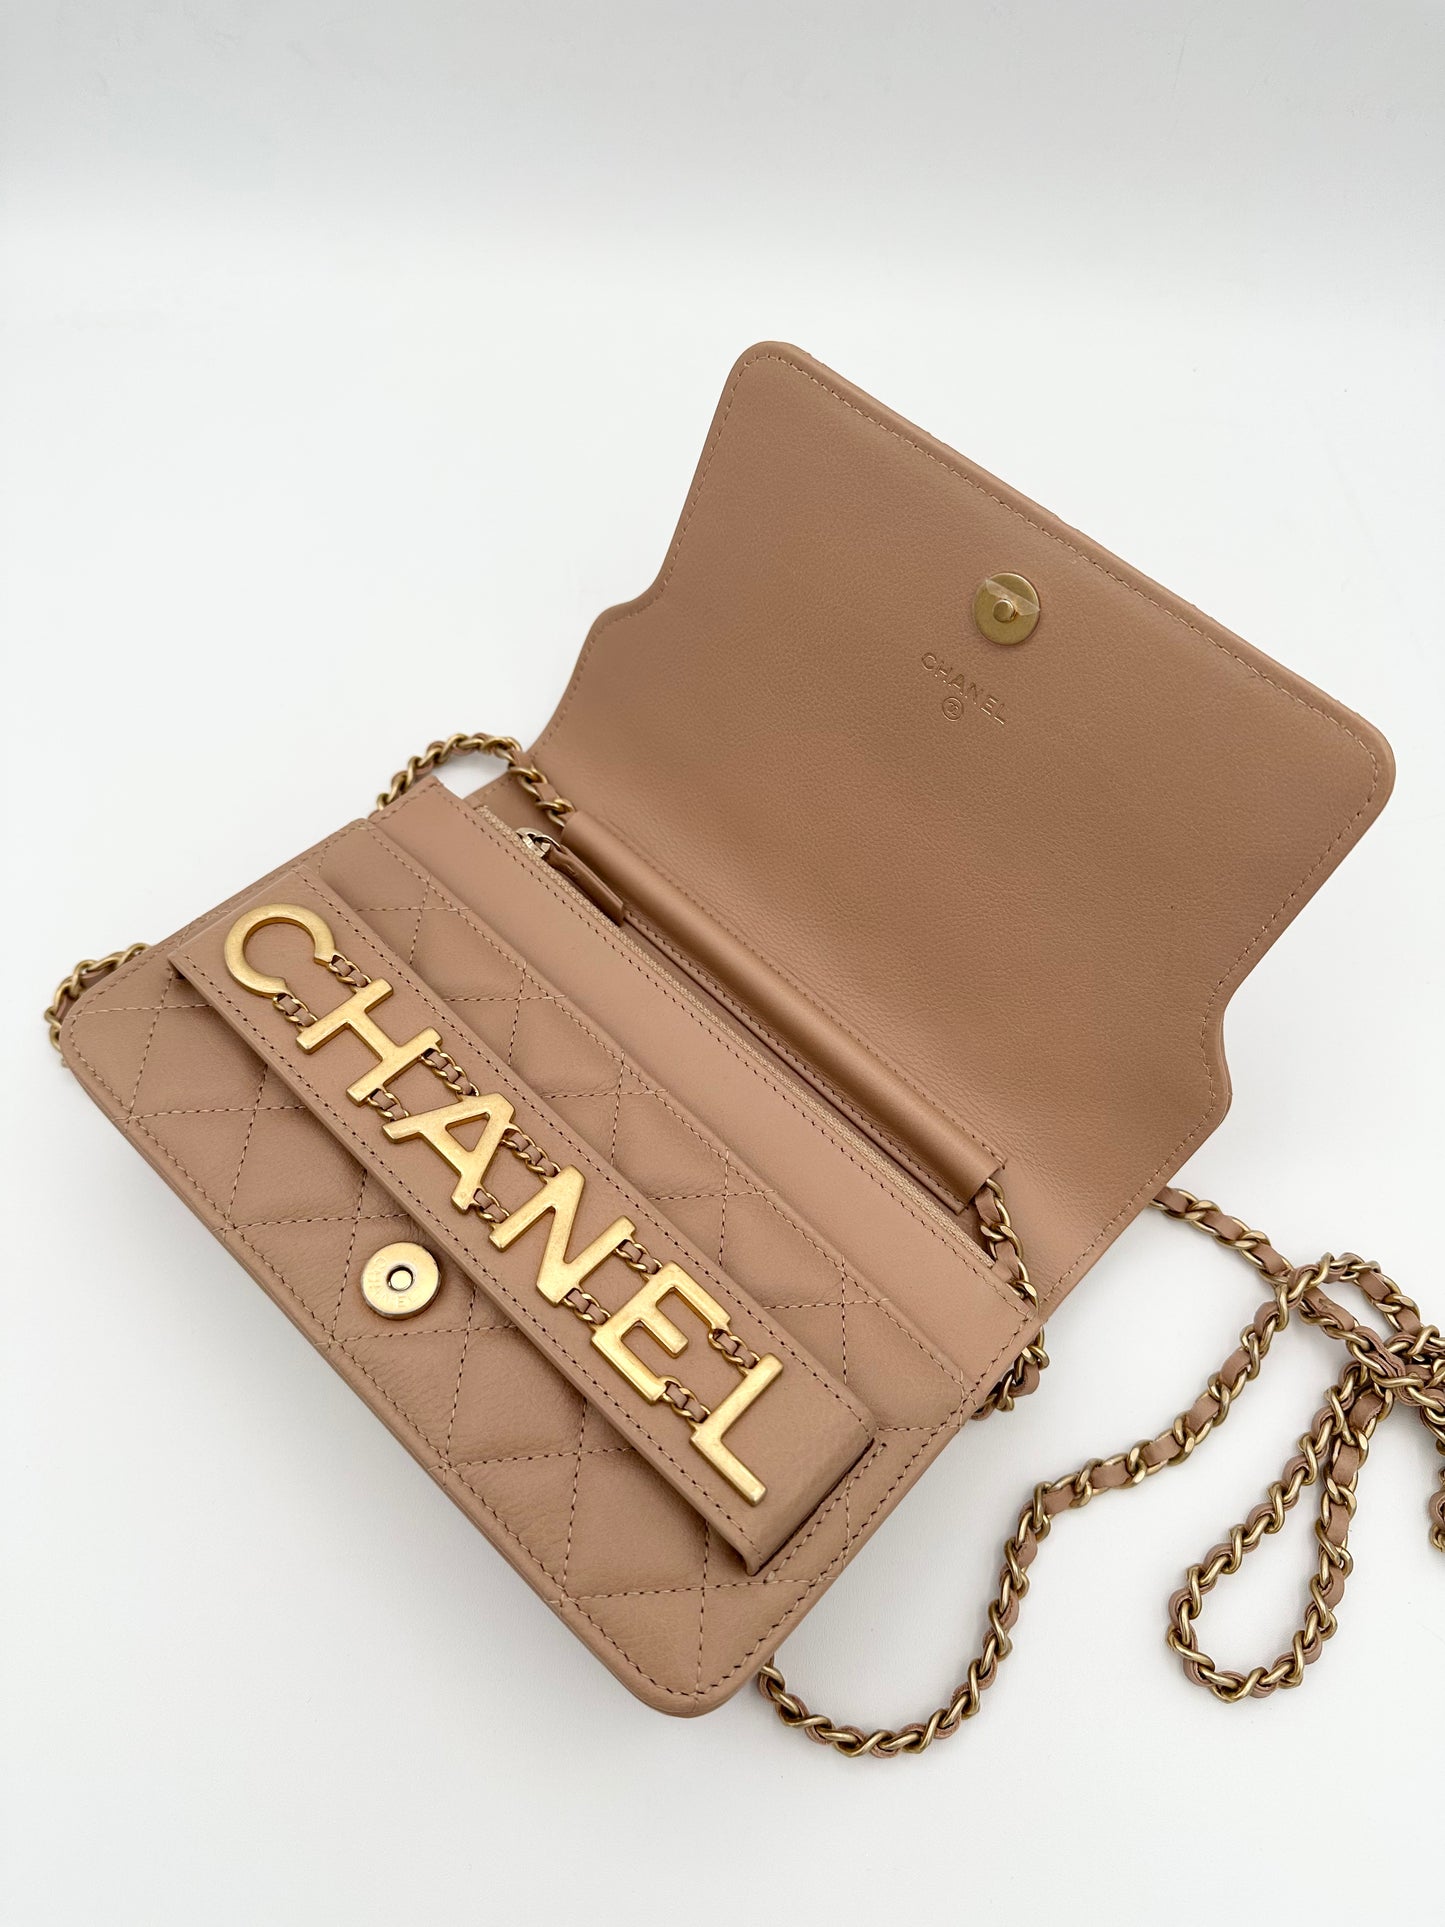 CHANEL Logo Enchained Flap WOC